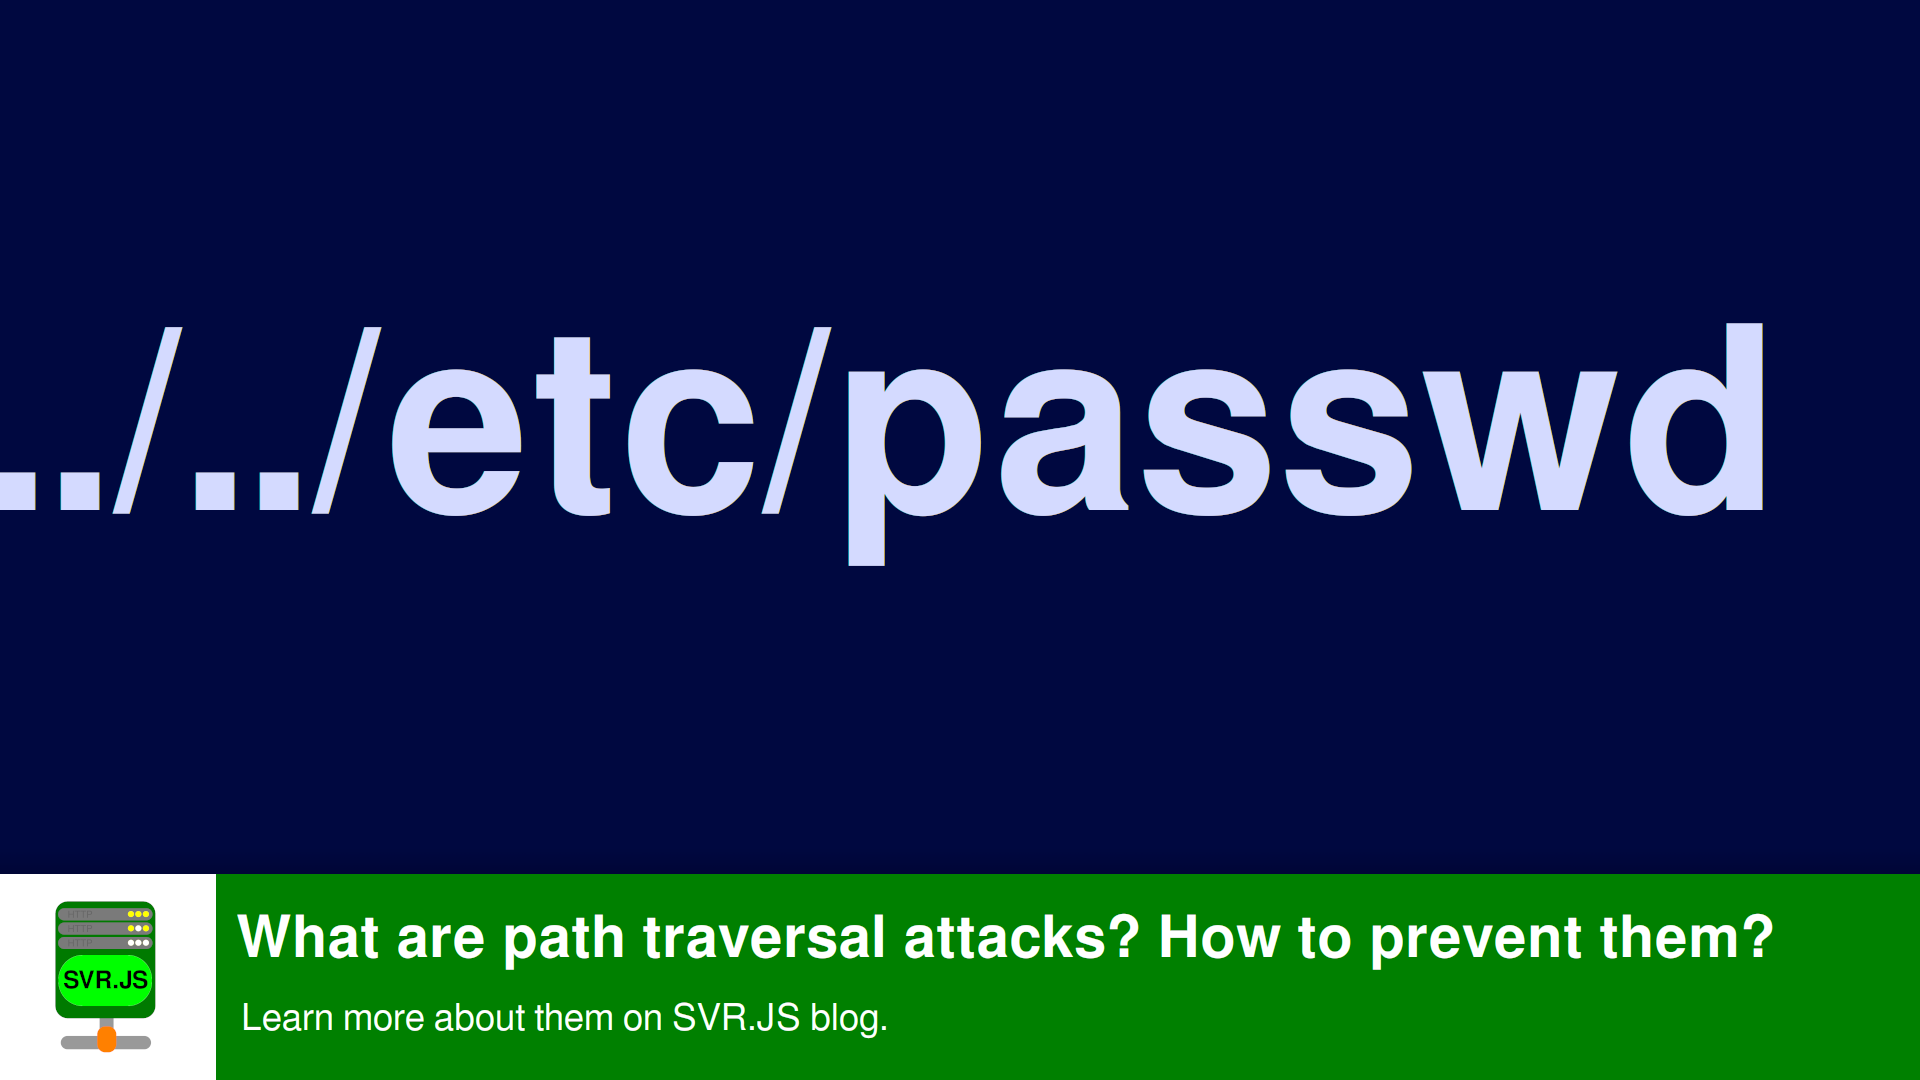 What are path traversal attacks? How to prevent them?